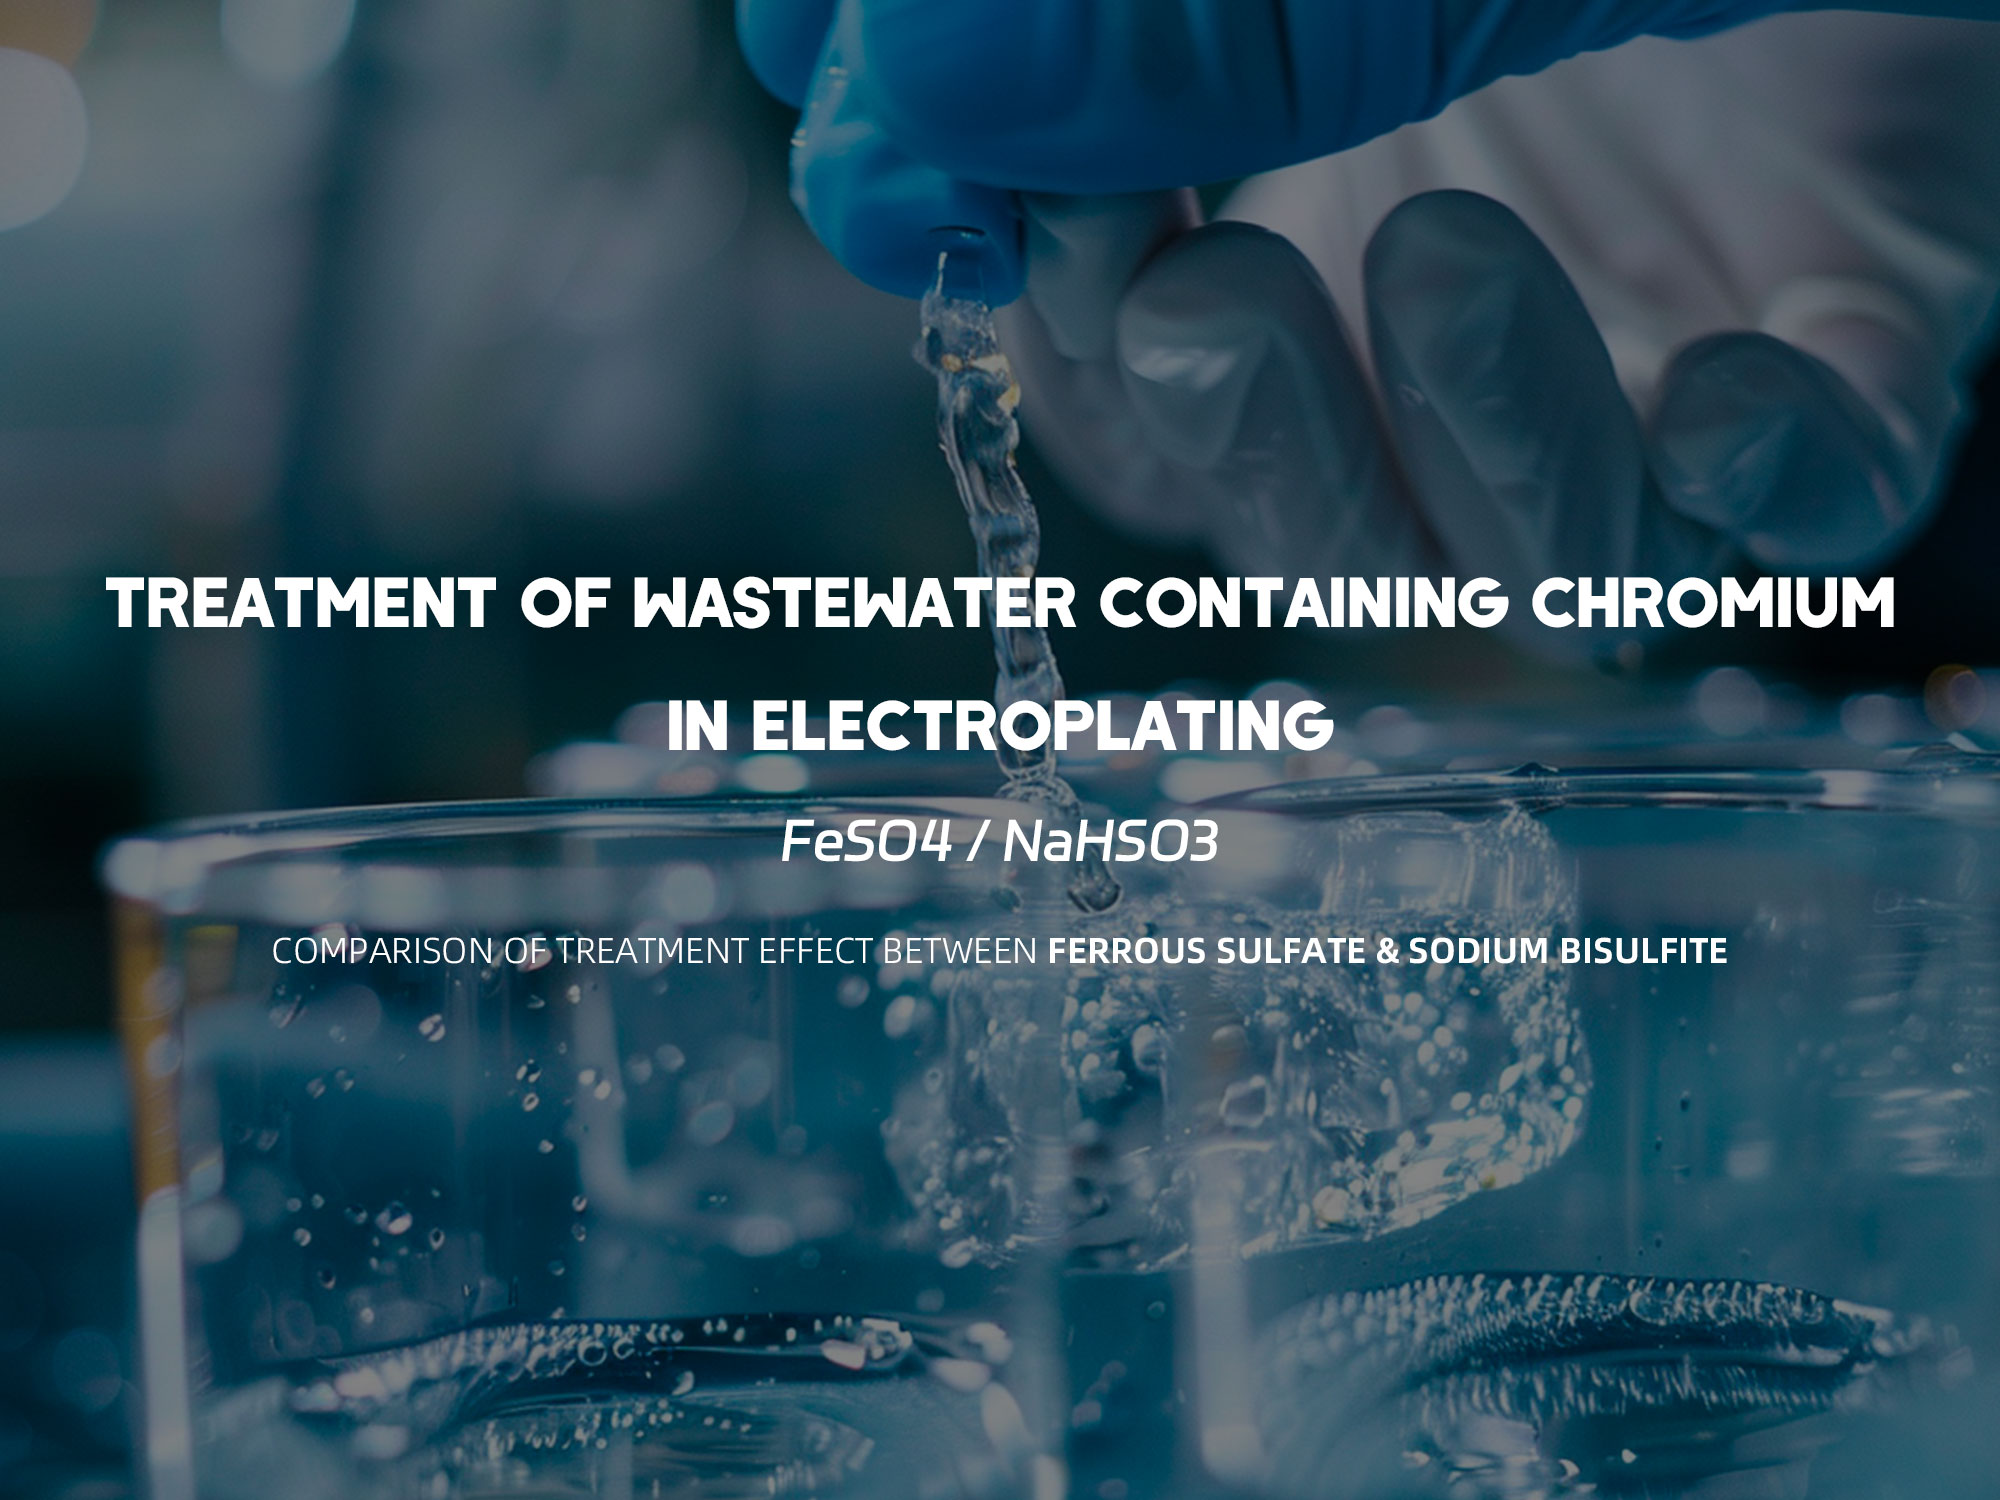 Treatment of wastewater containing chromium in electroplating